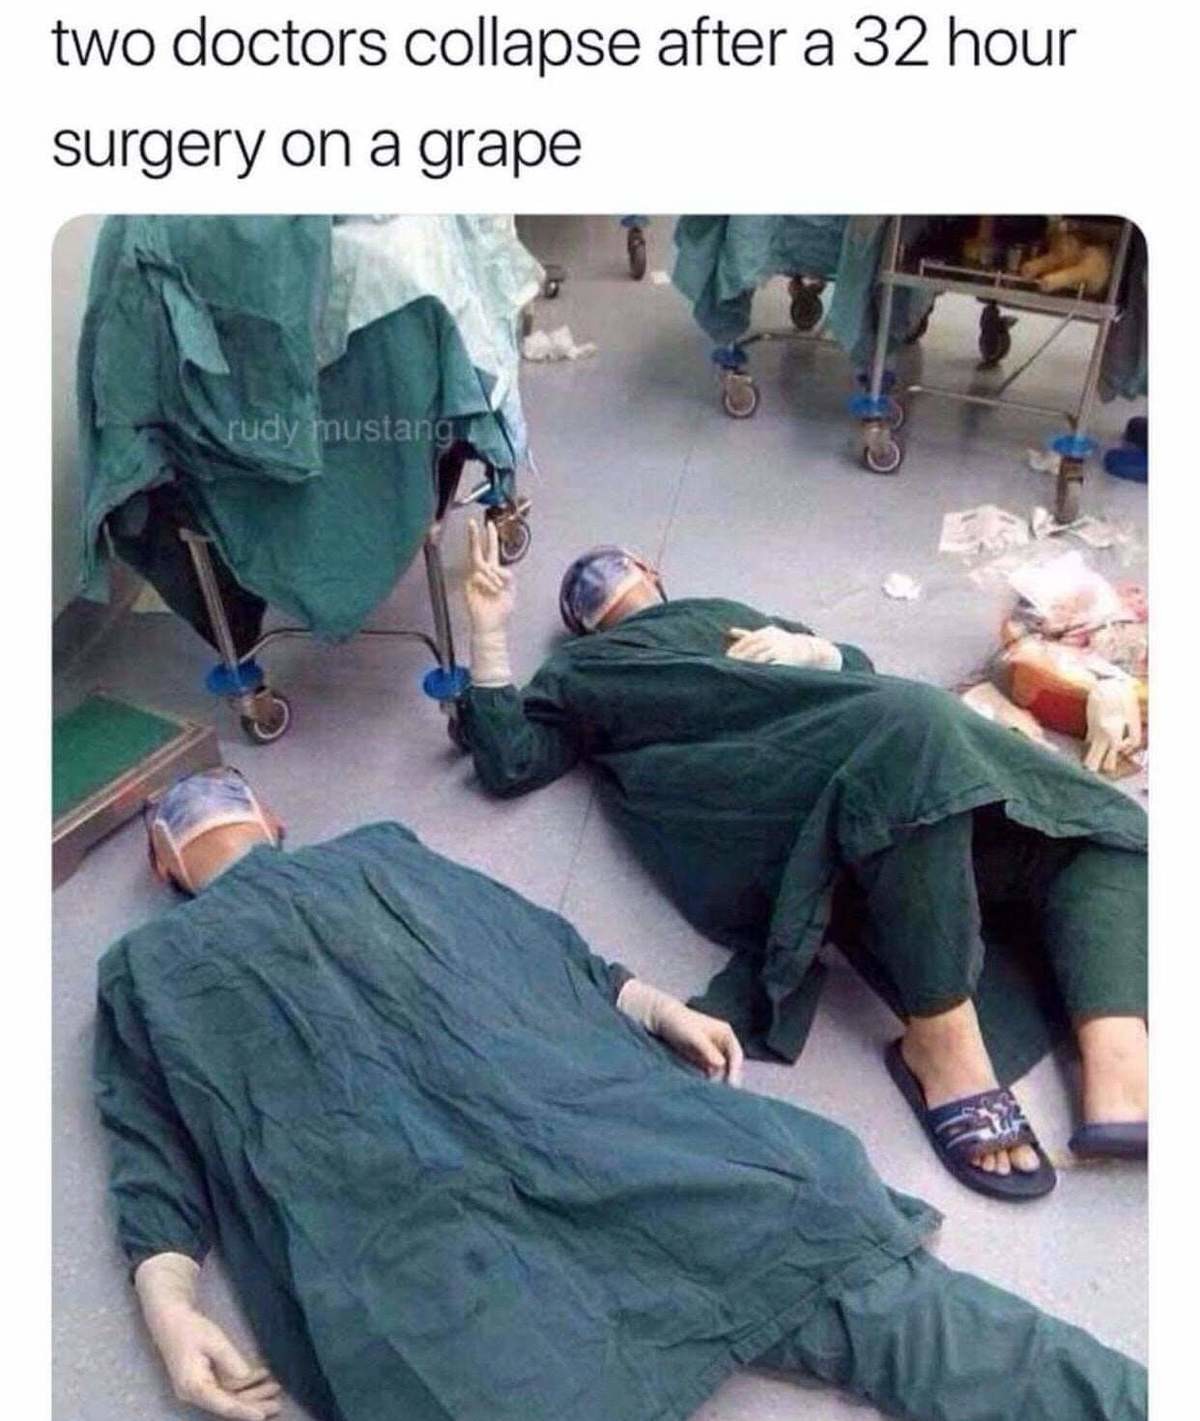 They did surgery on a grape. .. They did surgery on a grape?